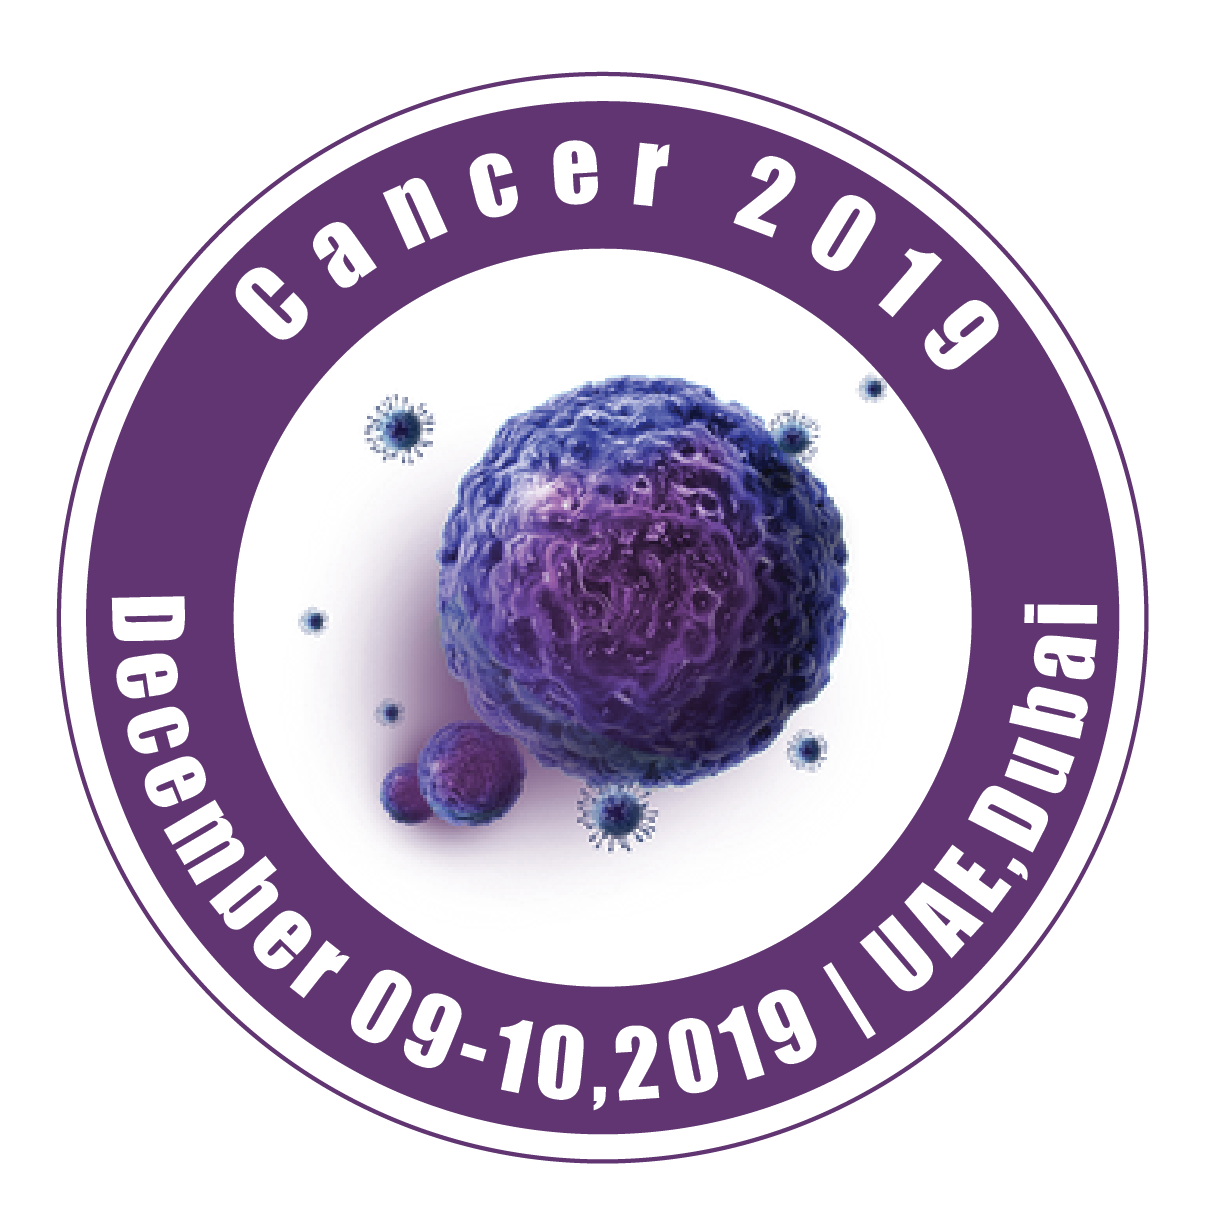 14th international conference on cancer and cancer therapy